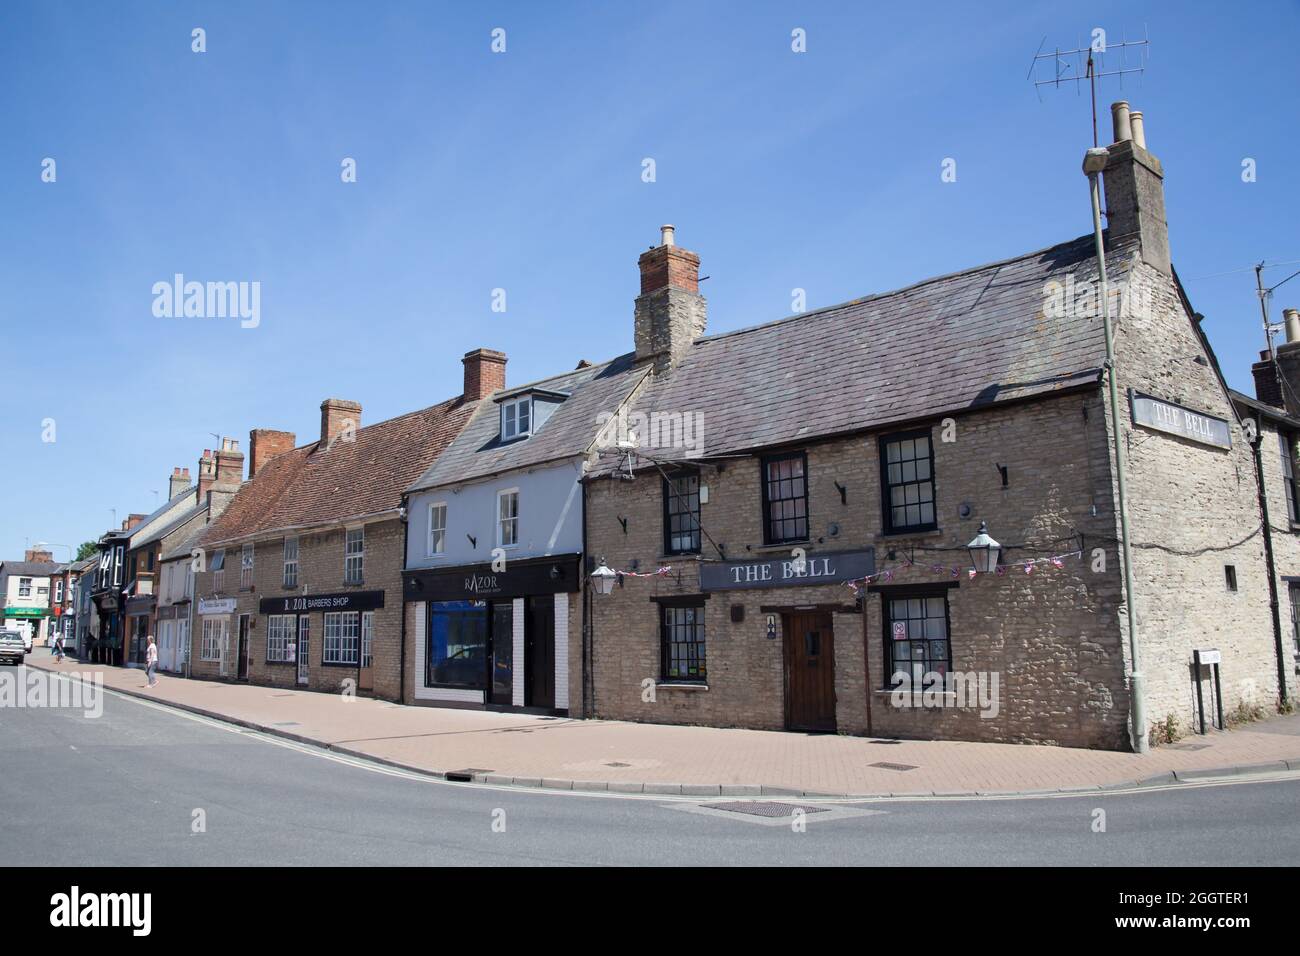 Pubs and shops on Bell Lane in Bicester, Oxfordshire in the UK Stock Photo